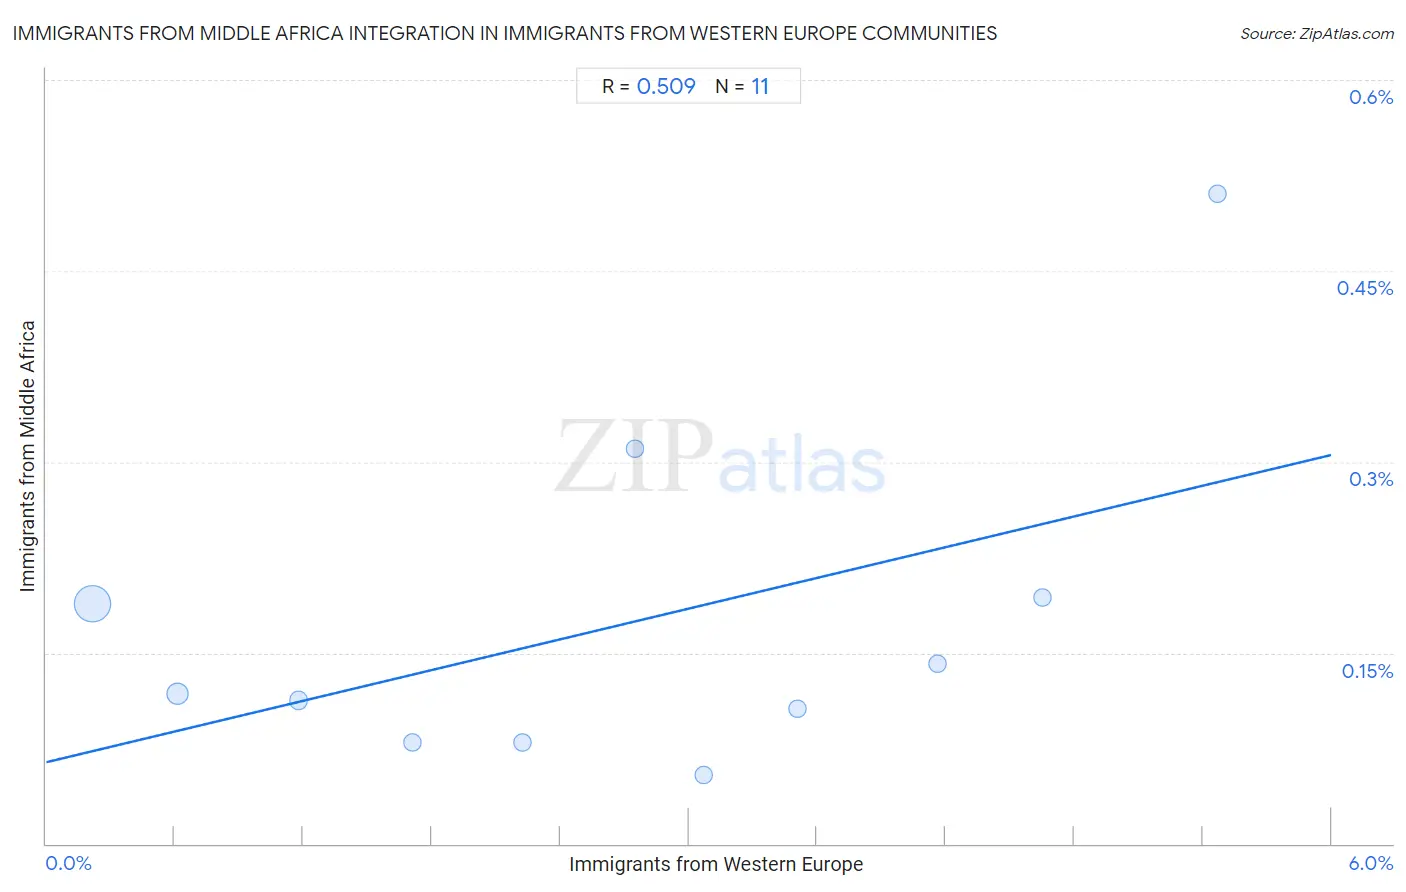 Immigrants from Western Europe Integration in Immigrants from Middle Africa Communities